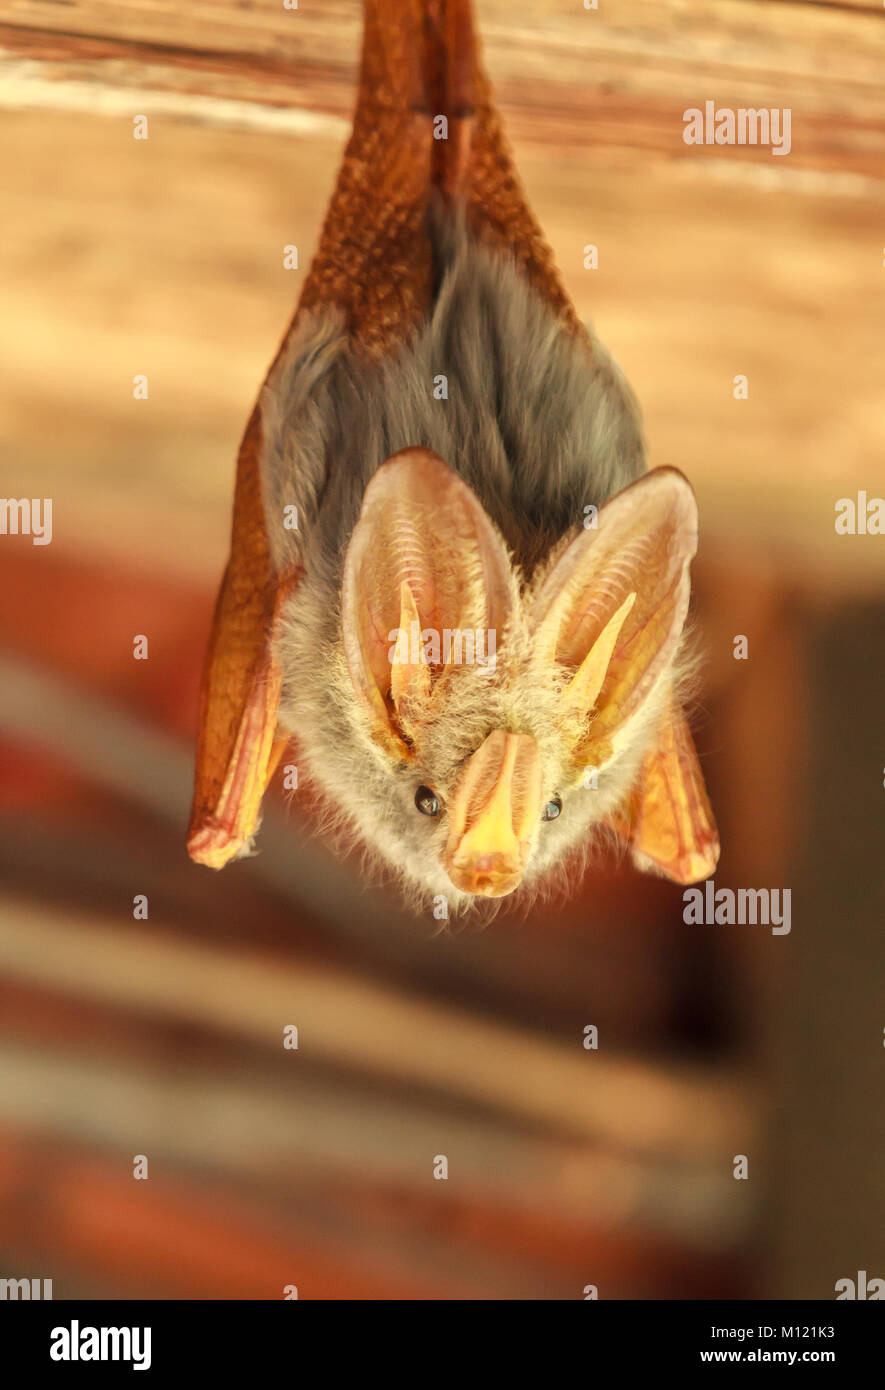 The yellow-winged bat is one of five species of false vampire bat from Africa. Stock Photo